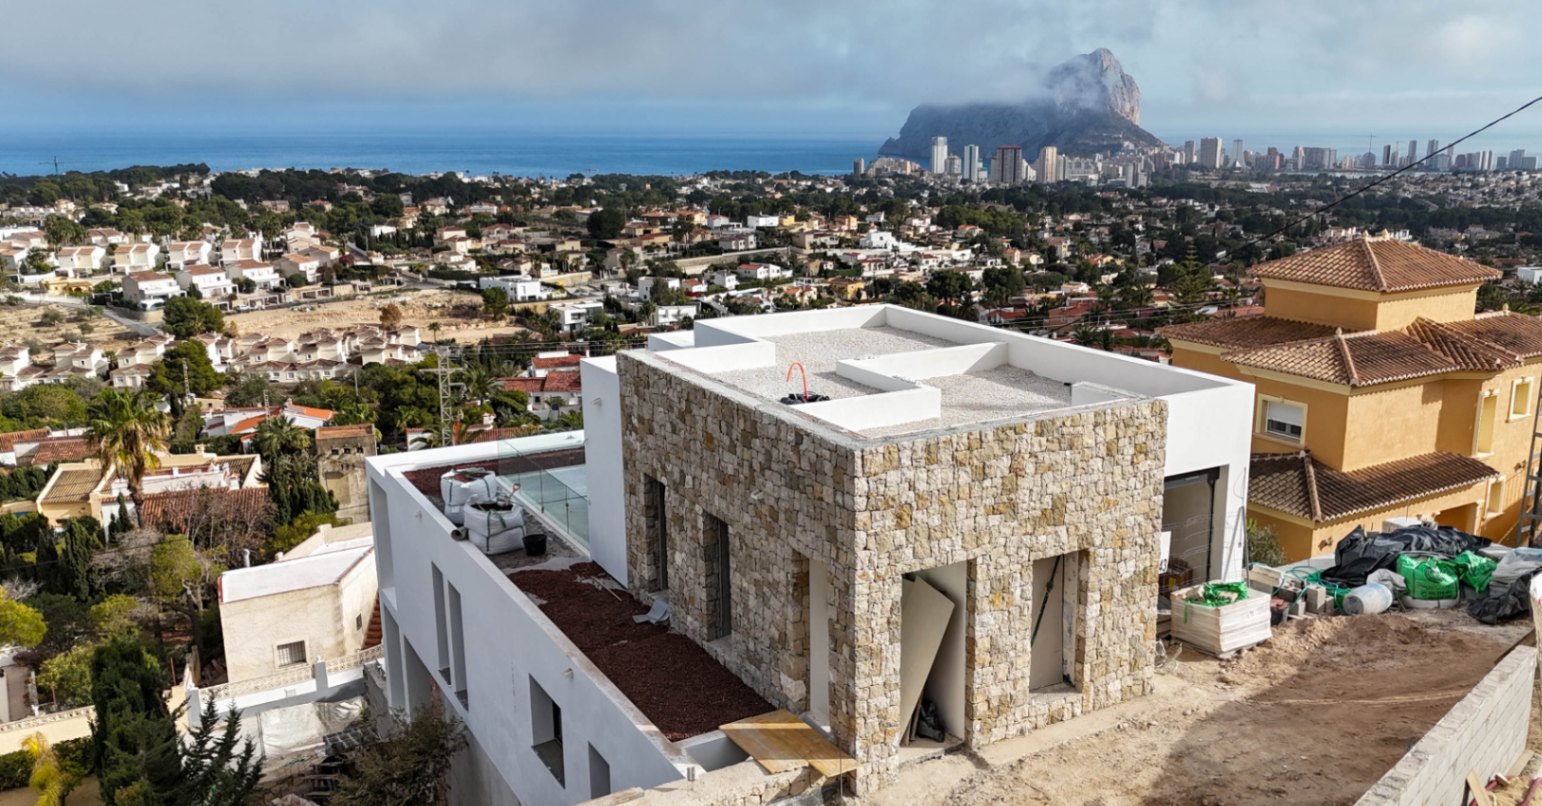 IN CALPE WE LOCATE THIS SPECTACULAR VILLA WITH PANORAMIC VIEWS OF THE SEA, CALPE AND THE PEÑON D'IFACH